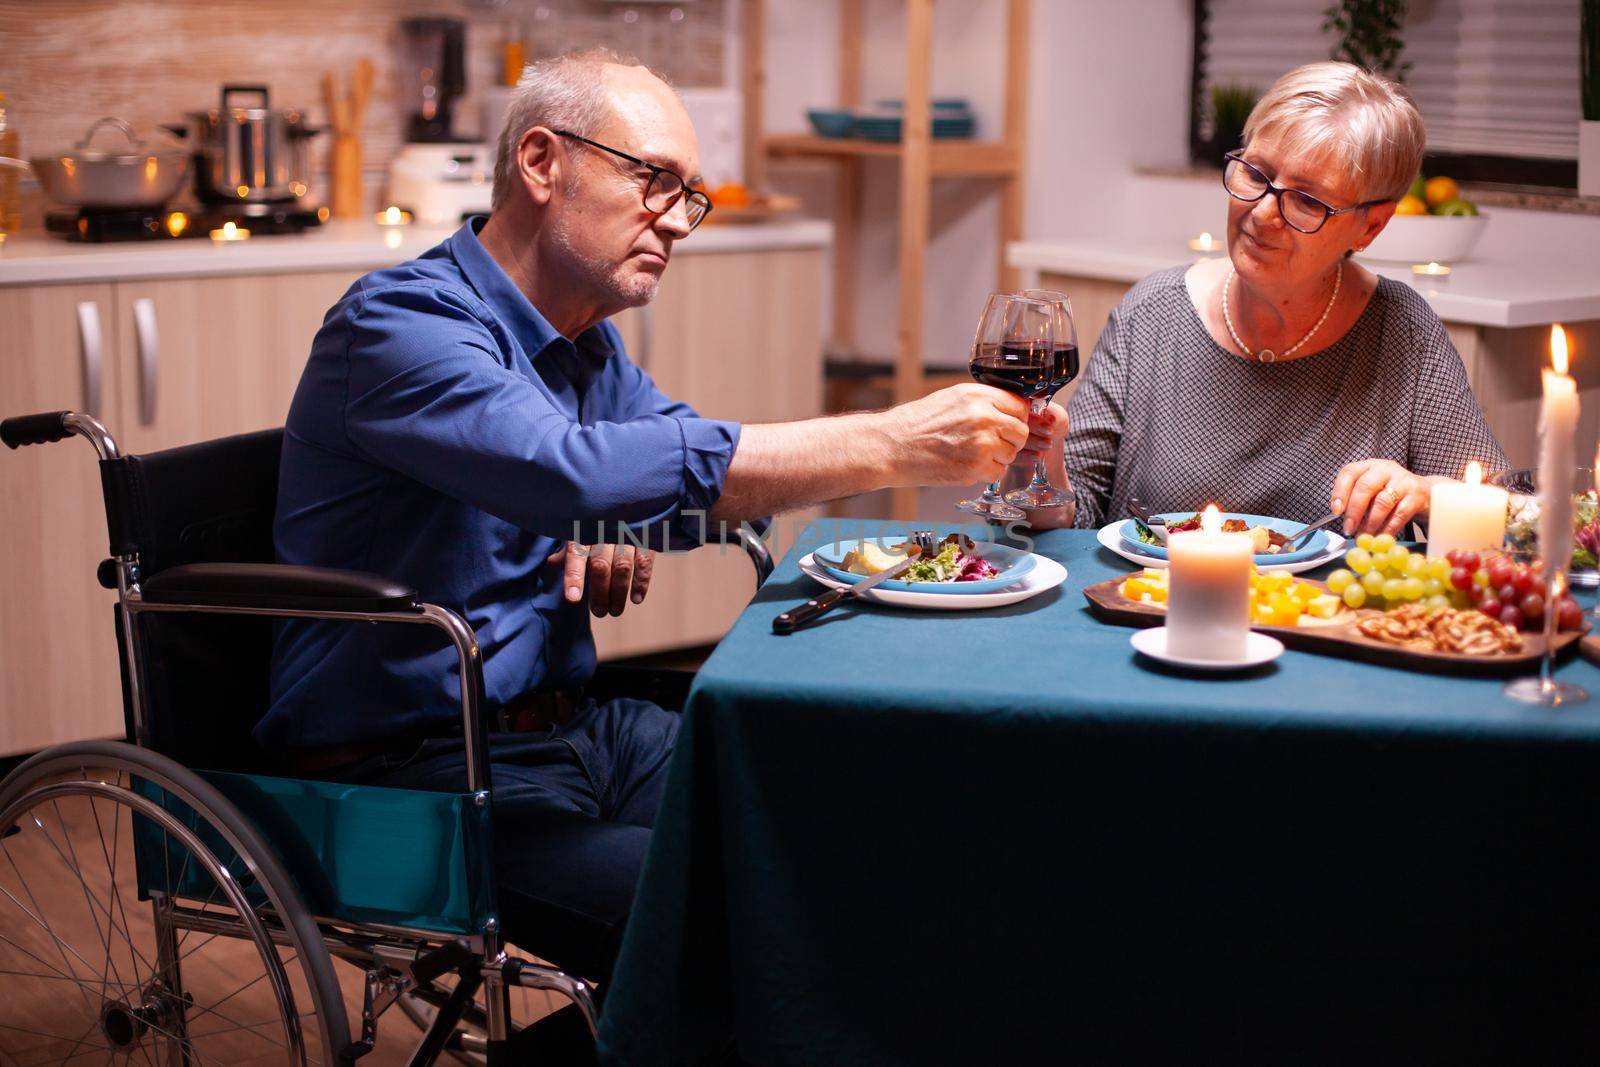 Man with disabilities having dinner with wife and clinking wine glass. Wheelchair immobilized paralyzed handicapped man dining with wife at home, enjoying the meal